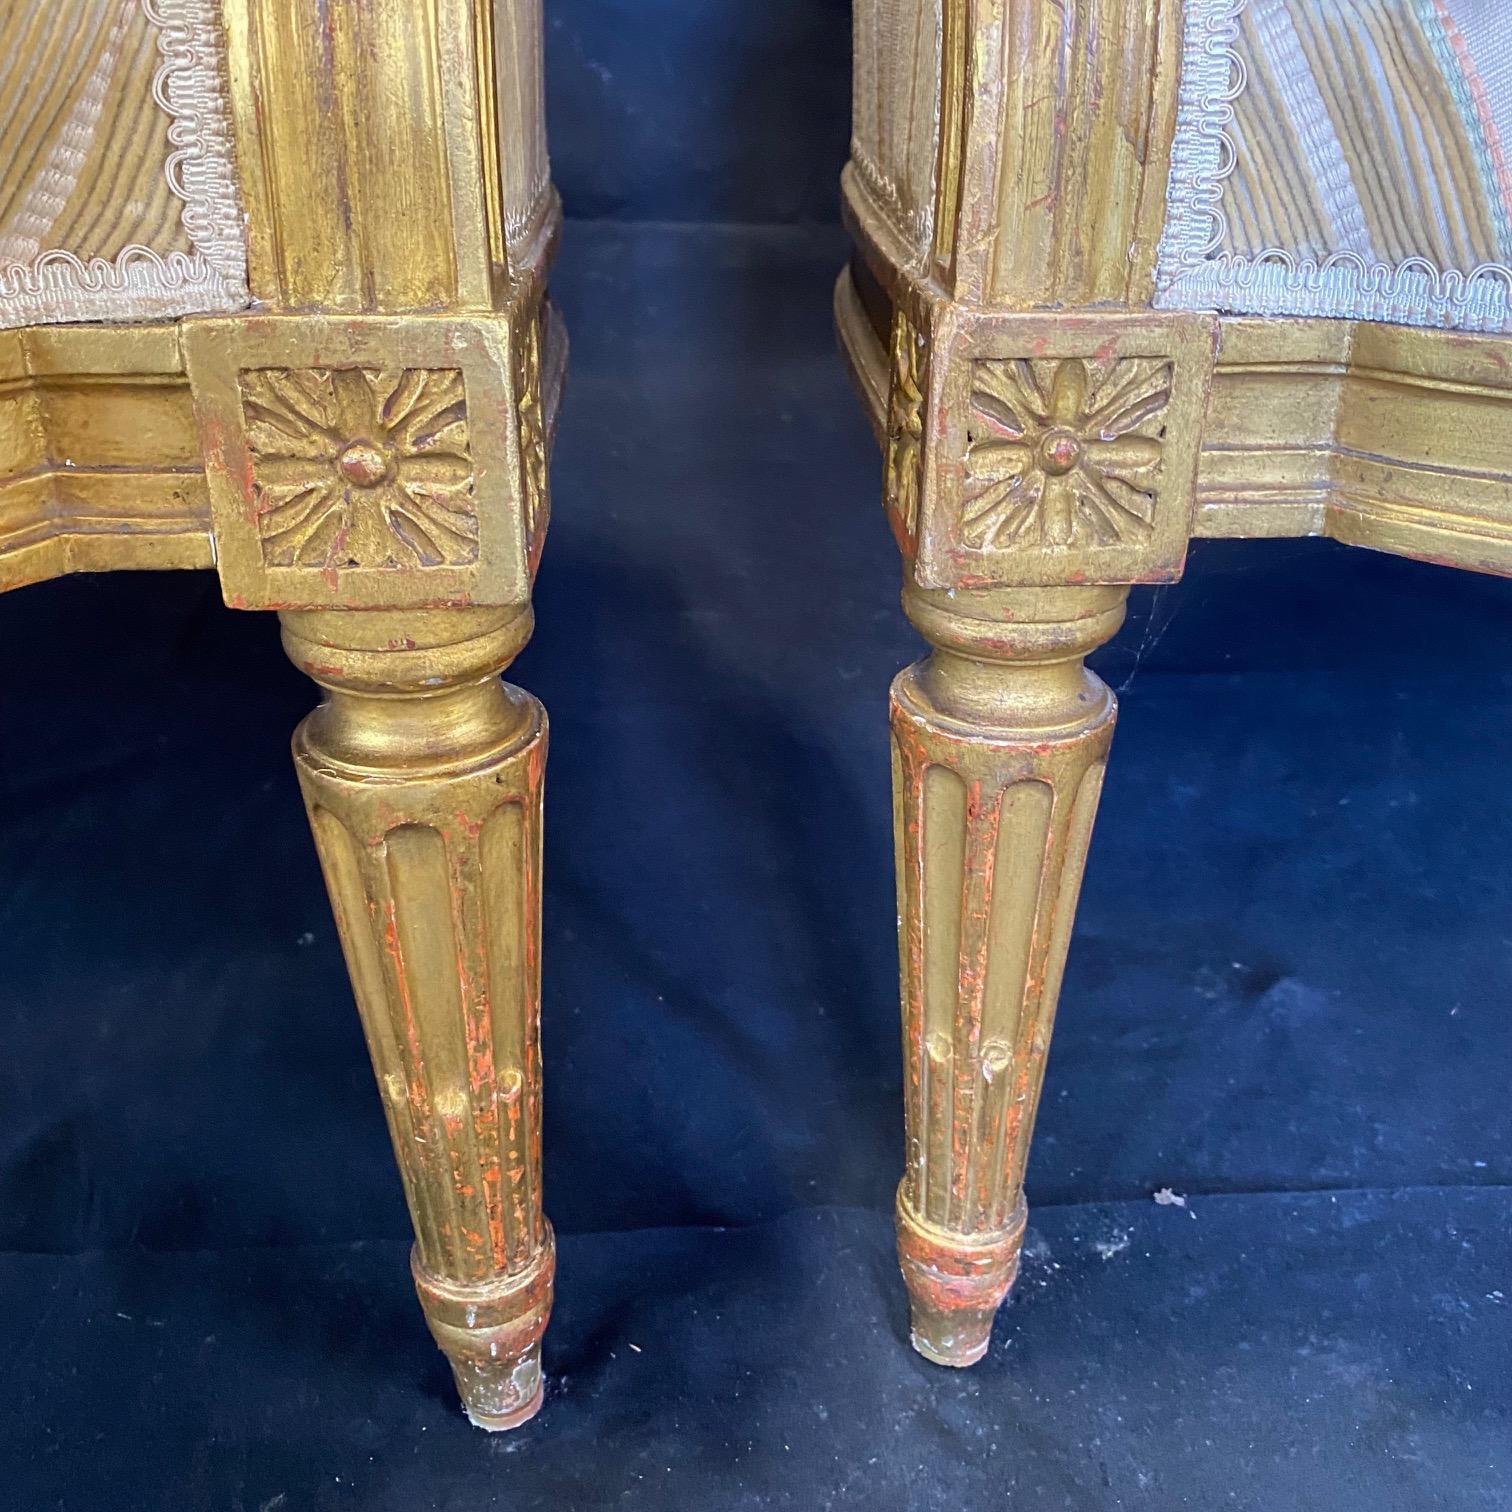 Upholstery #6158, 19th Century Pair of Rare French Louis XVI Bergeres Chairs with Original